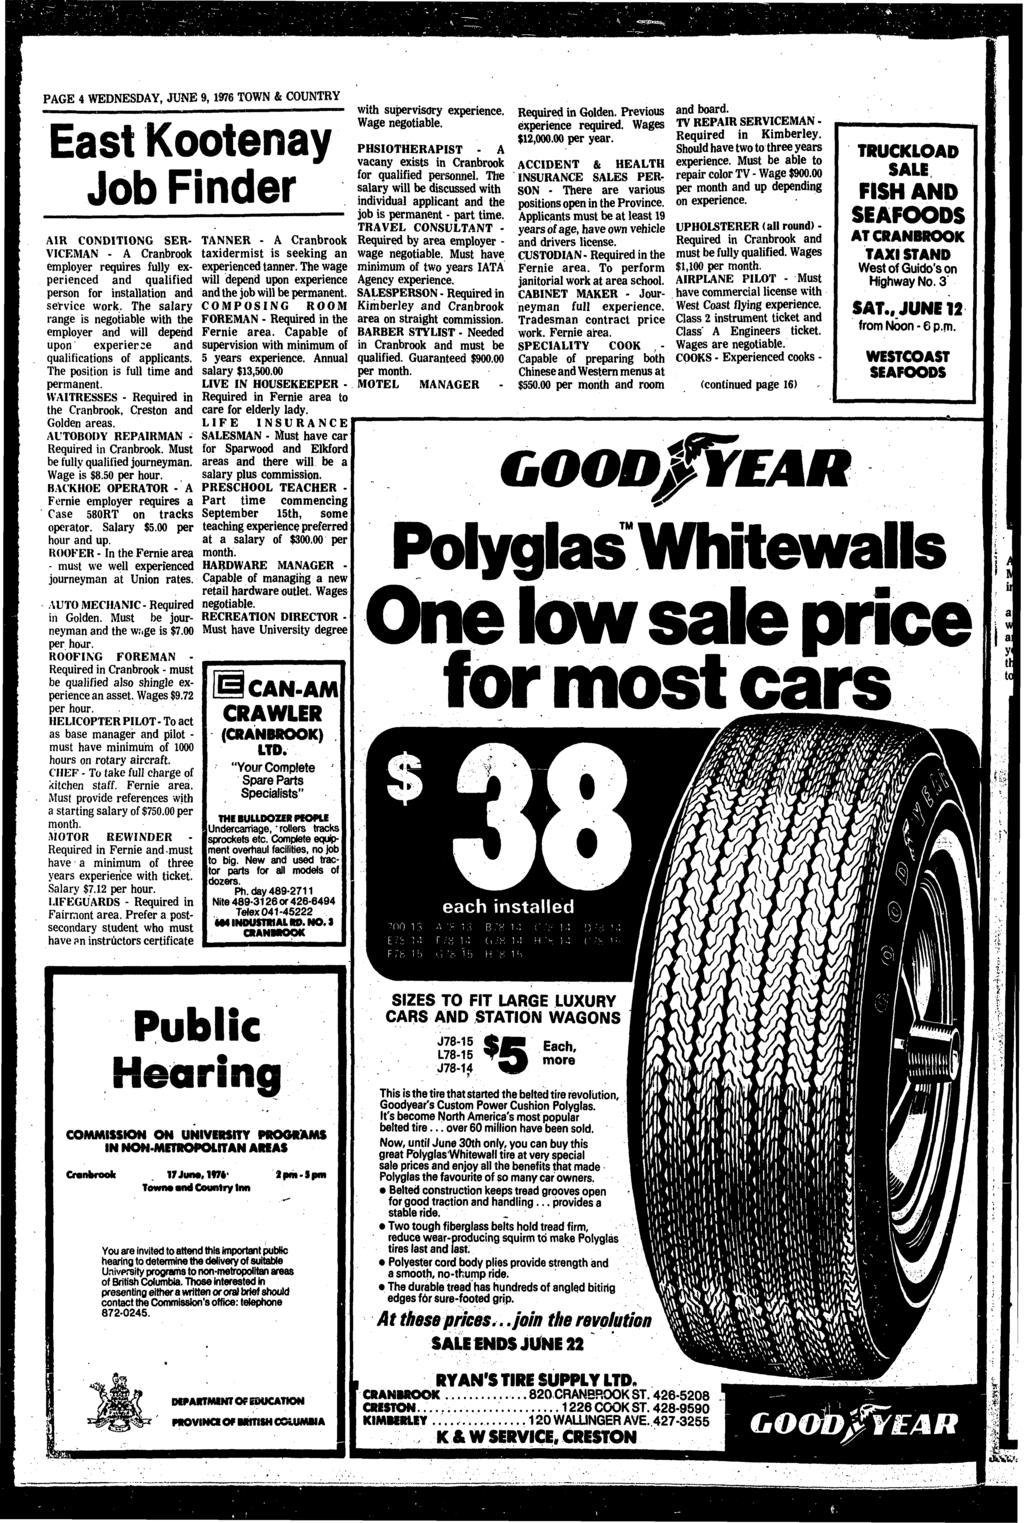 PAGE 4 WEDNESDAY JUNE 9976 TOWN & COUNTRY East Kootenay Job Fnder WATRESSES Requred n Requred n Ferne area to the Cranbrook Creston and care for elderly lady Golden areas LFE NSURANC AUTOB0)Y